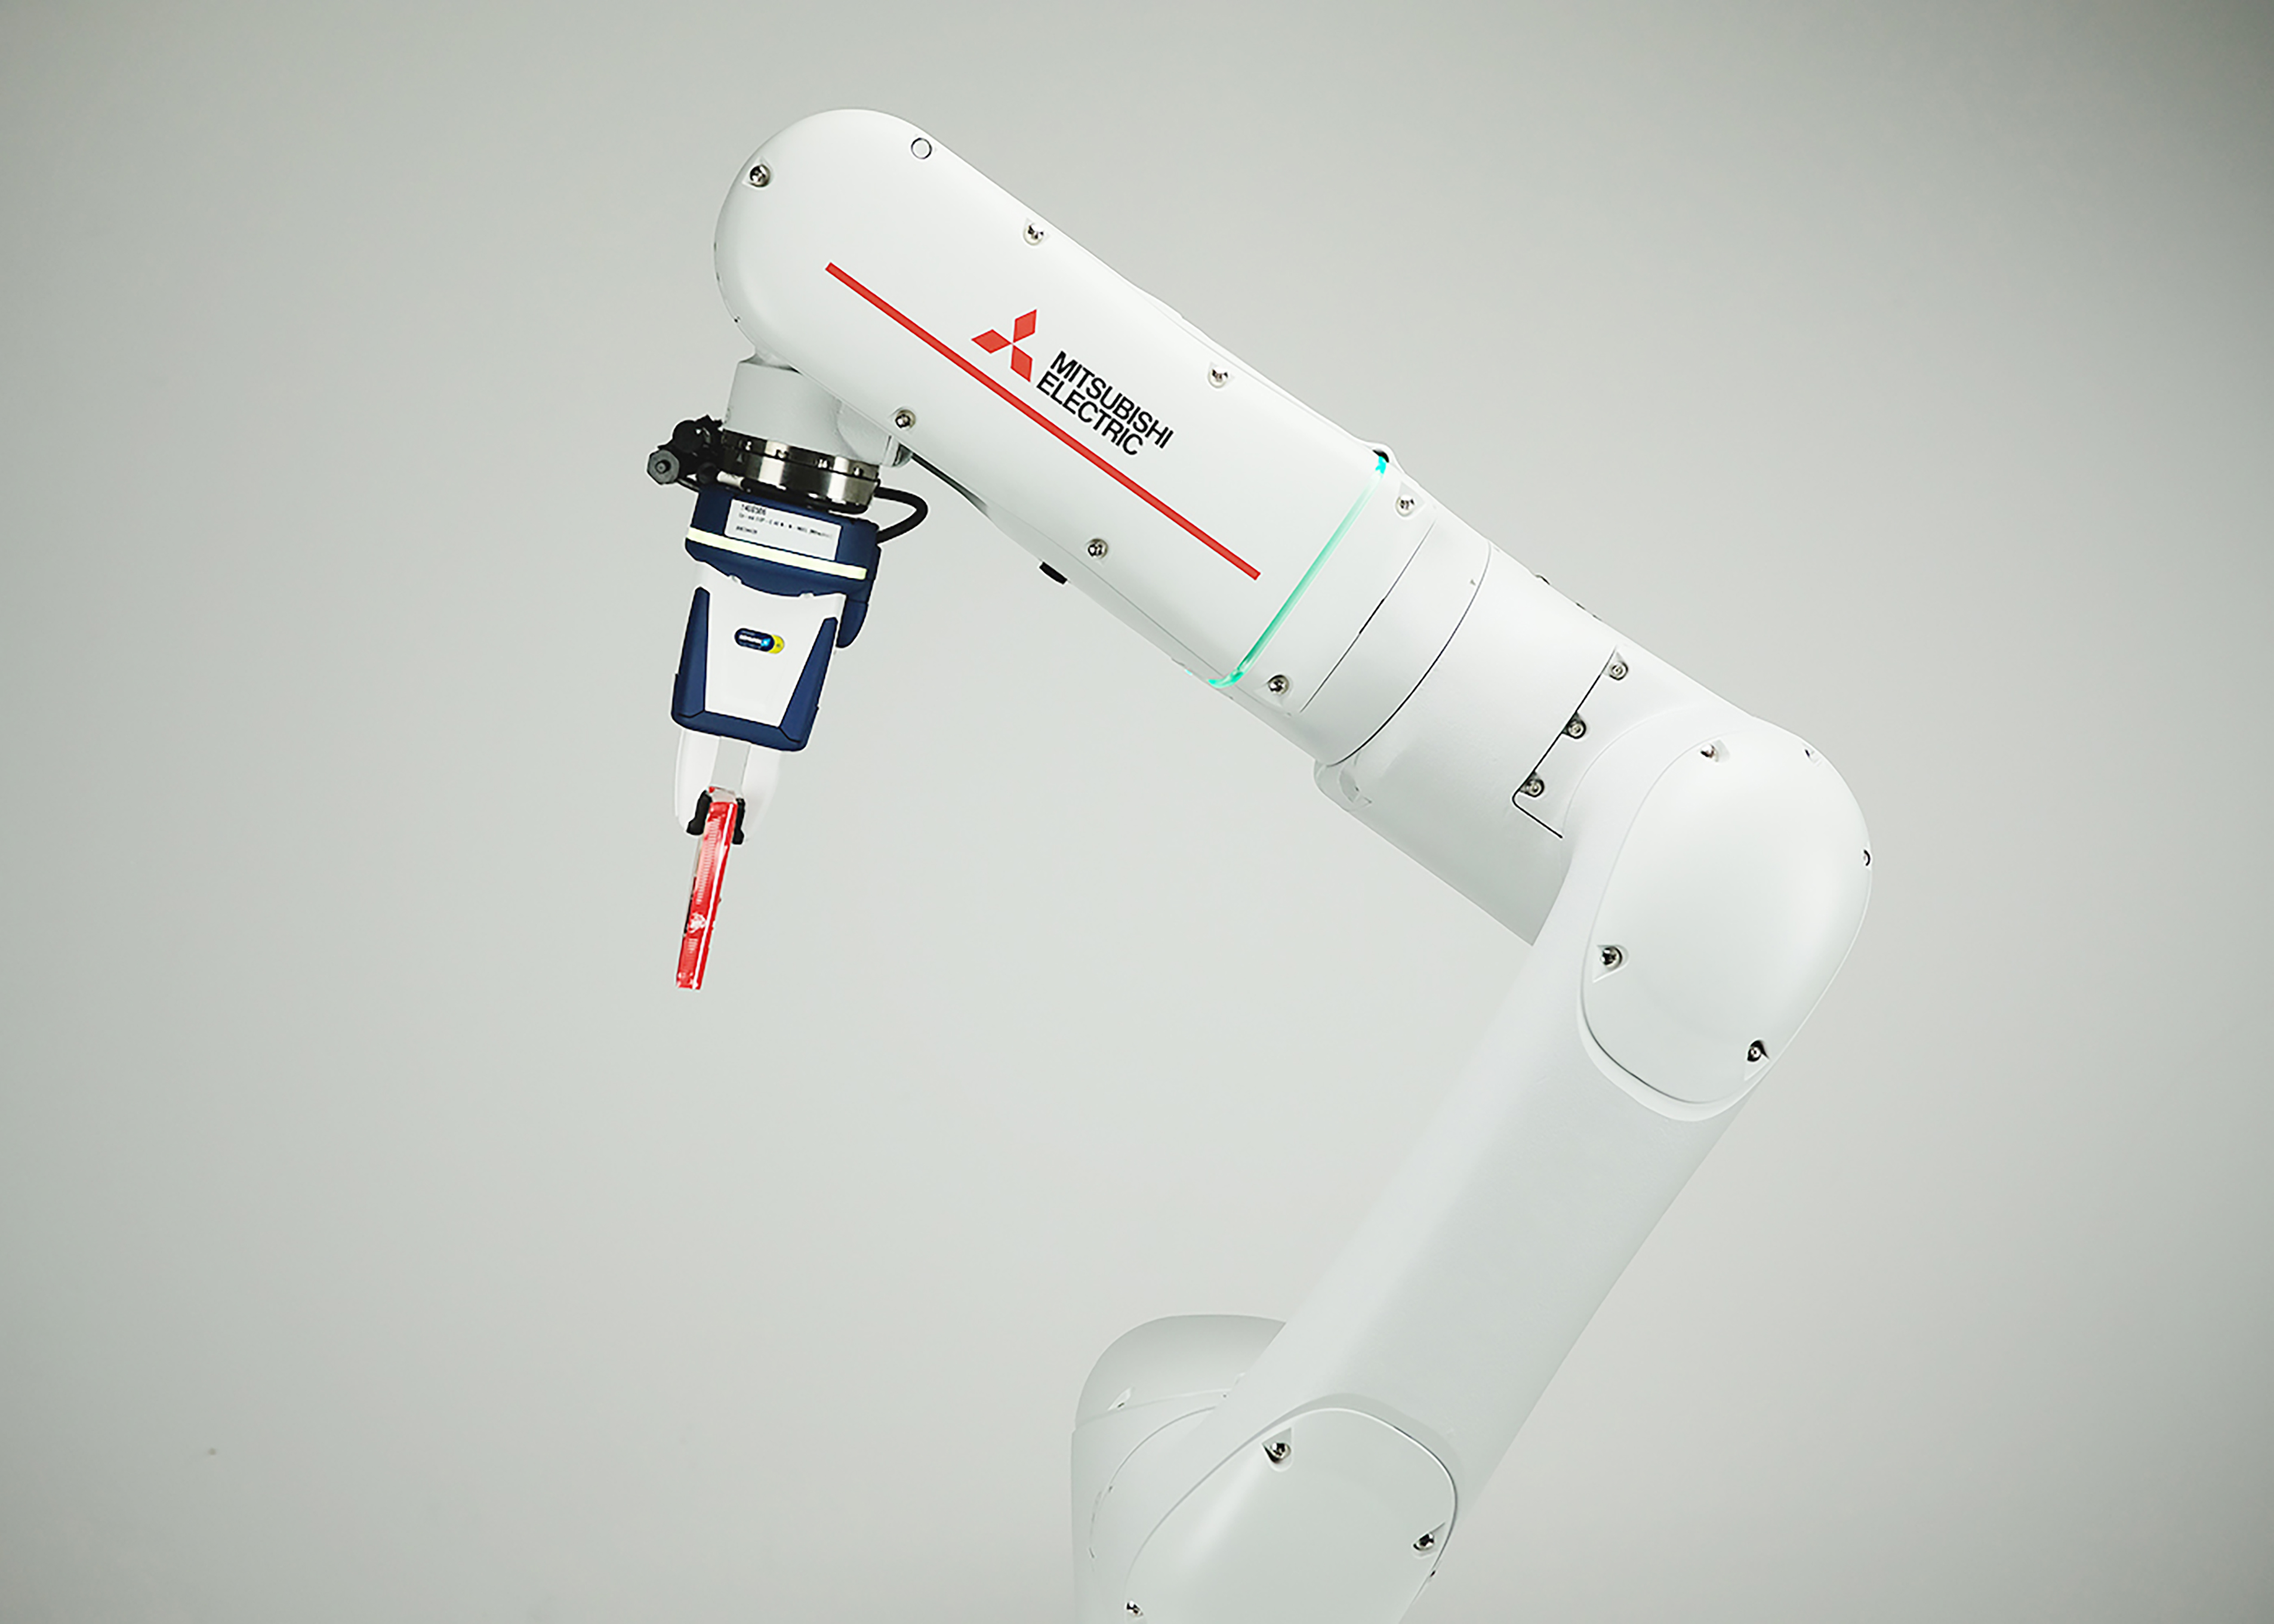 Cobots are ideal for applications with limited room and frequent interactions between operators and robots. [Source: Mitsubishi Electric Europe B.V.]